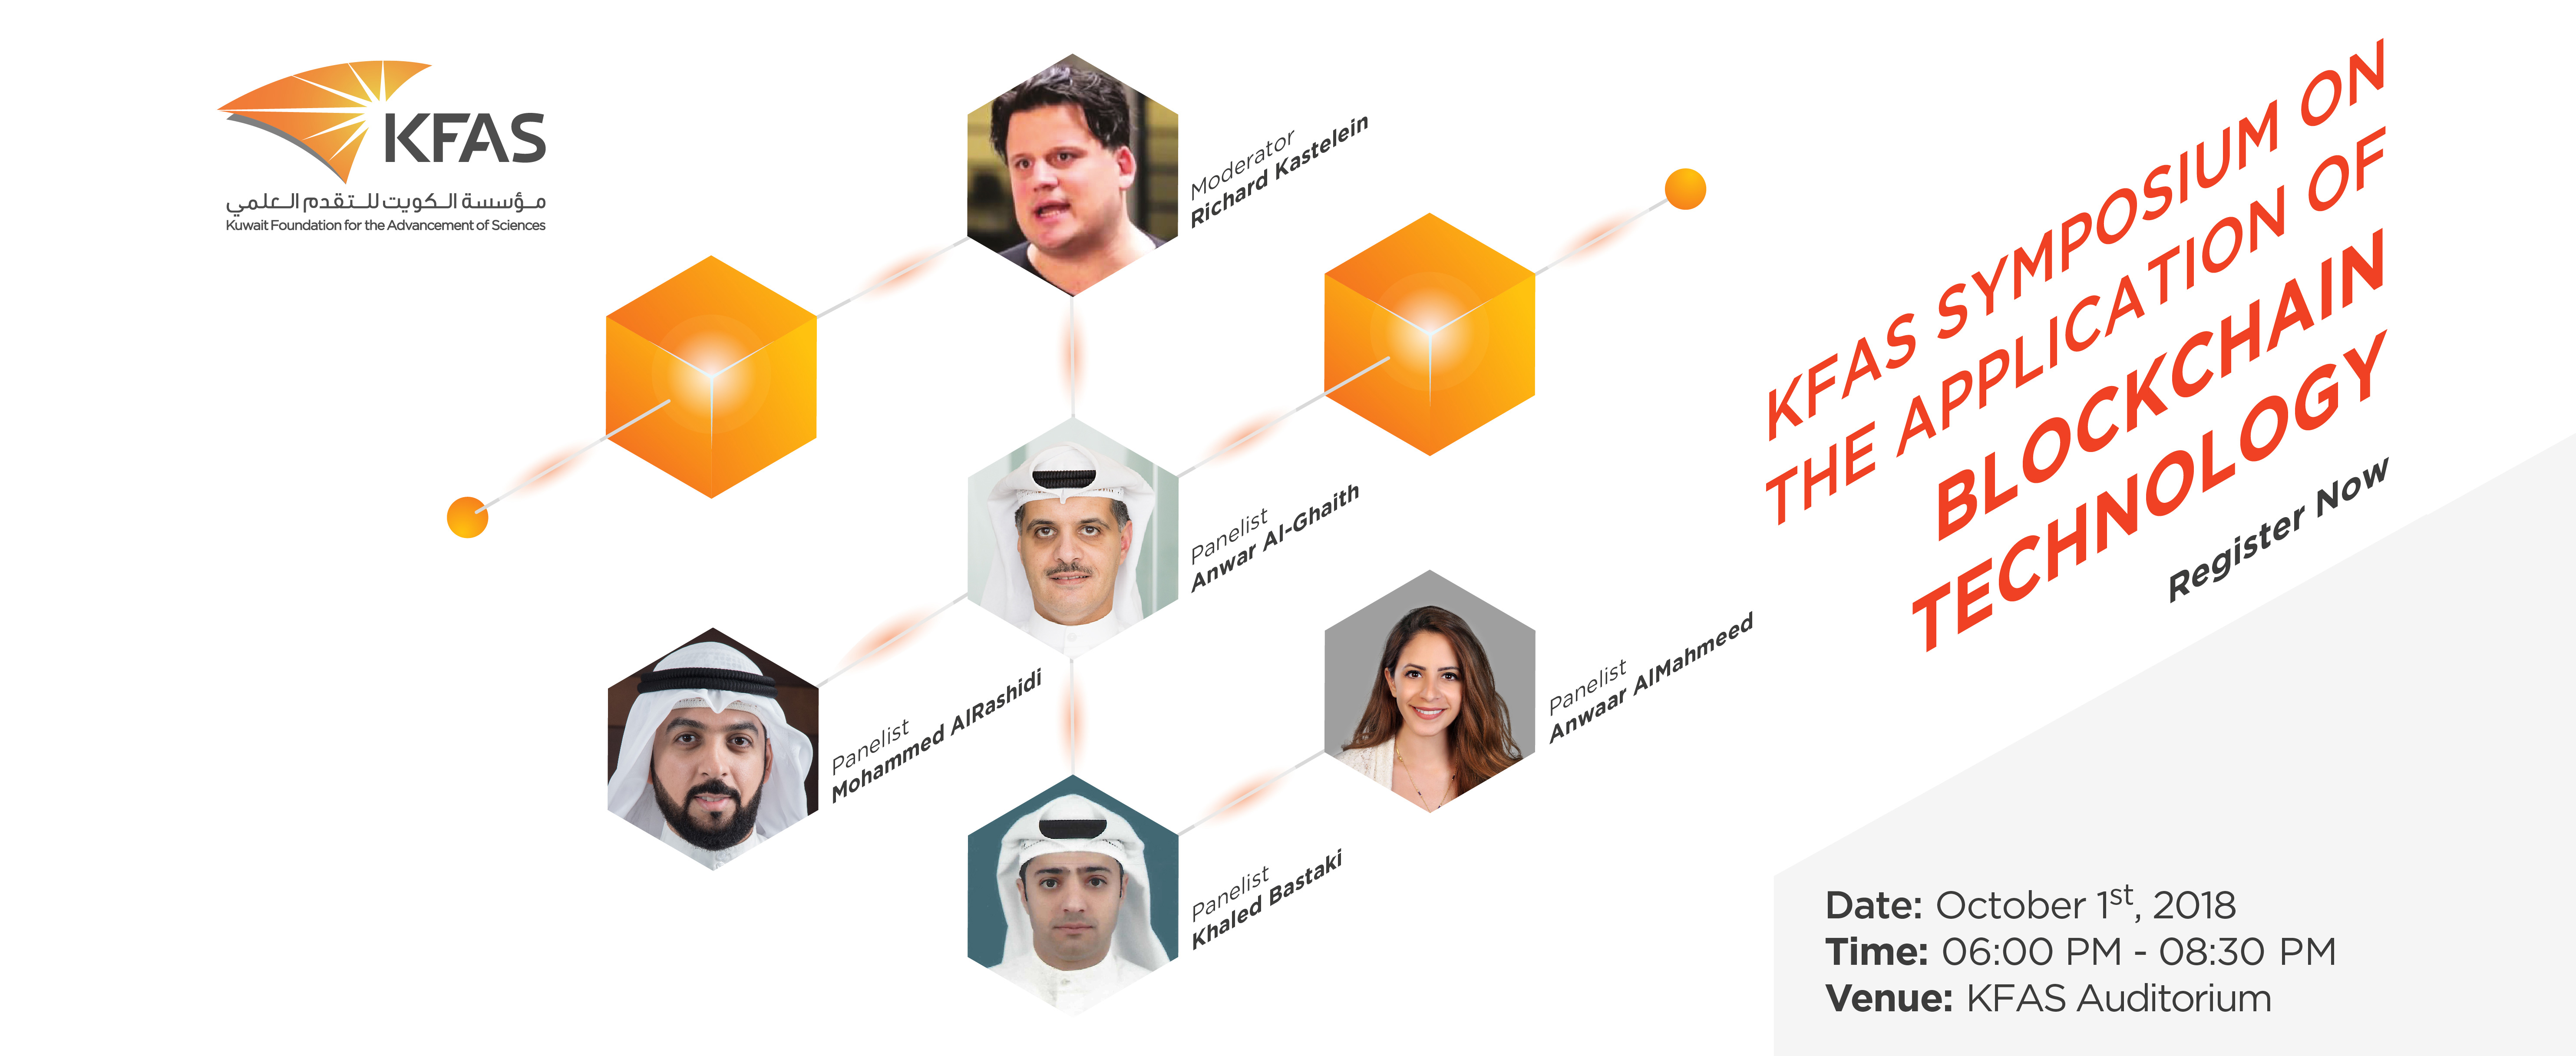 KFAS Symposium on the Applications of Blockchain Technology